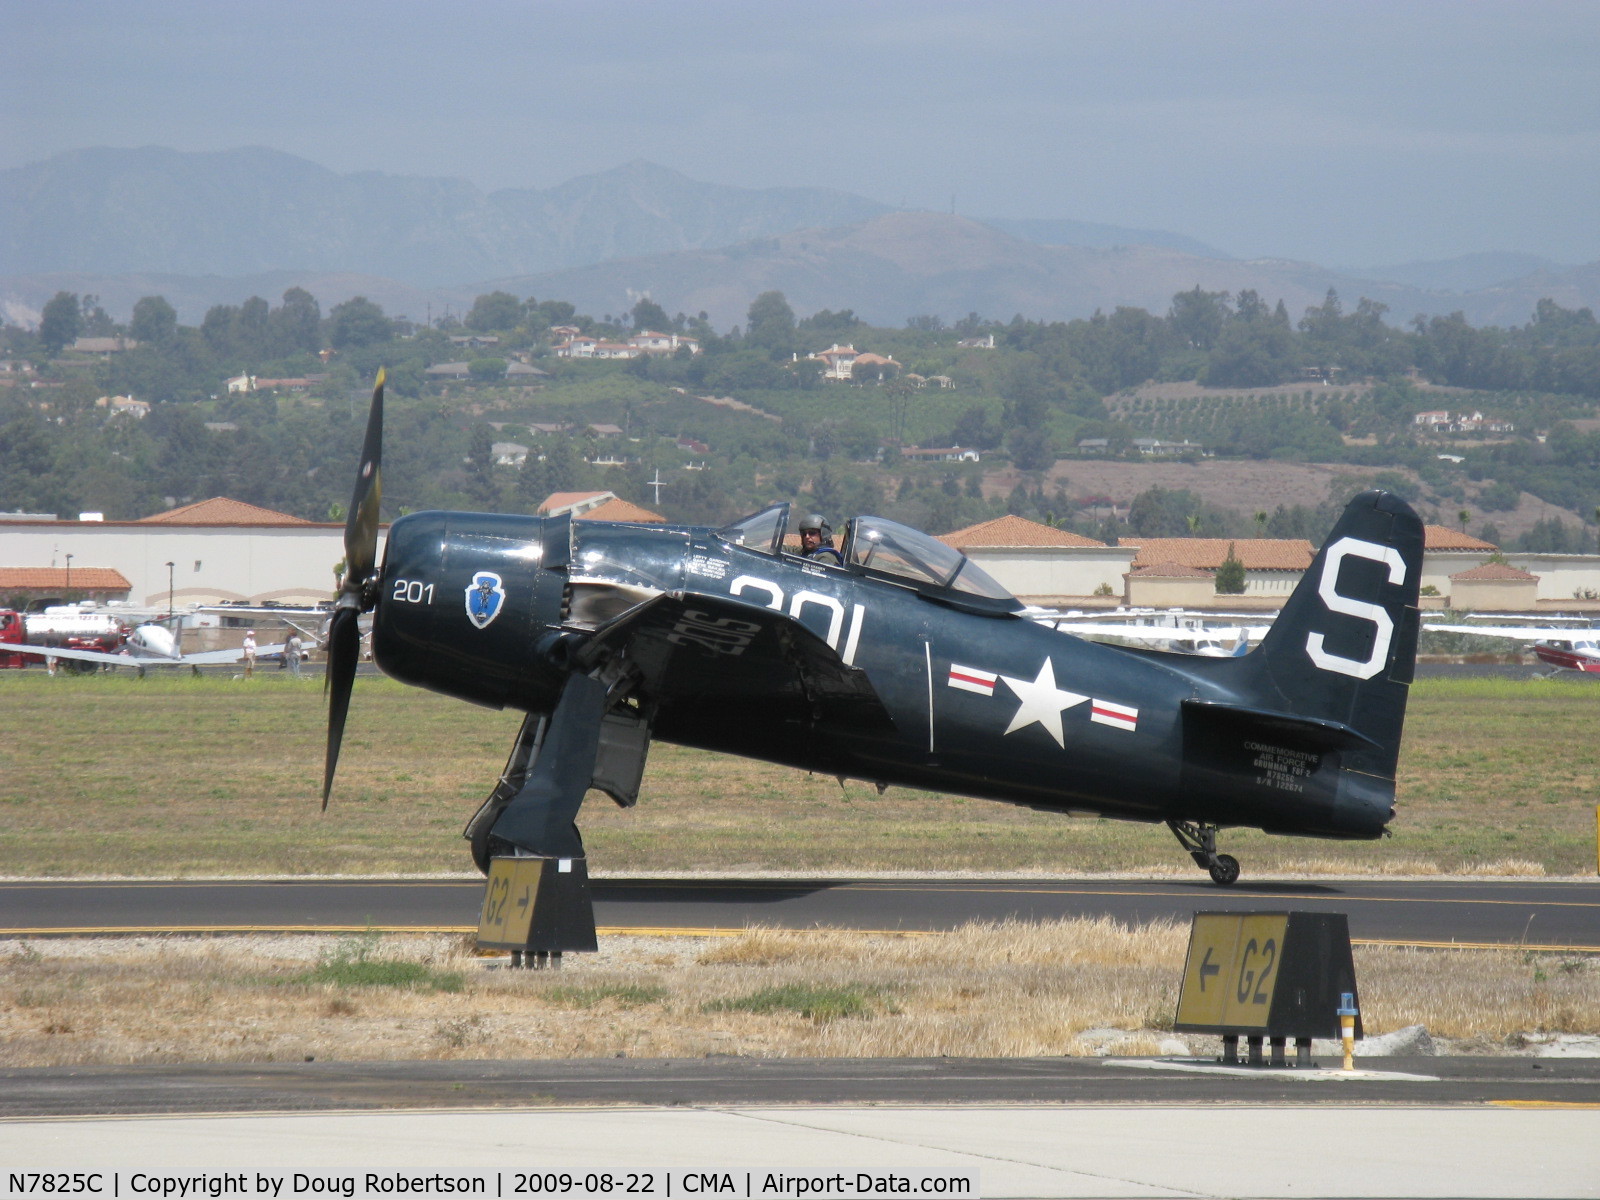 N7825C, 1948 Grumman F8F-2 (G58) Bearcat C/N D.1227, 1949 Grumman F8F-2 BEARCAT, P&W R-2800-34W Double Wasp 2,100 Hp, taxi that way